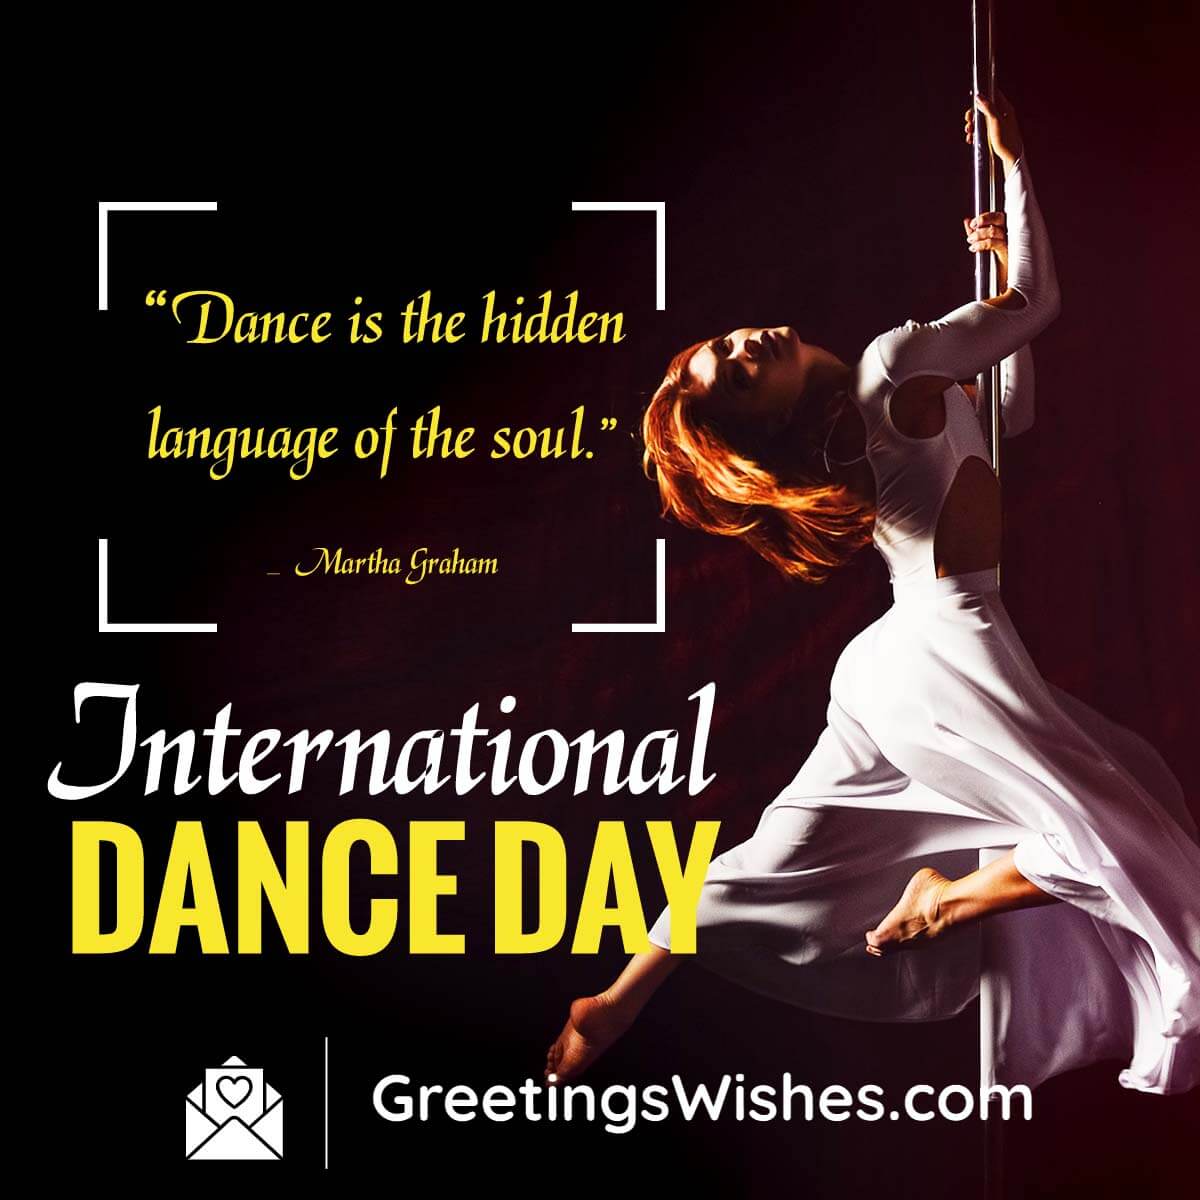 International Dance Day Wishes (29 April) - Greetings Wishes